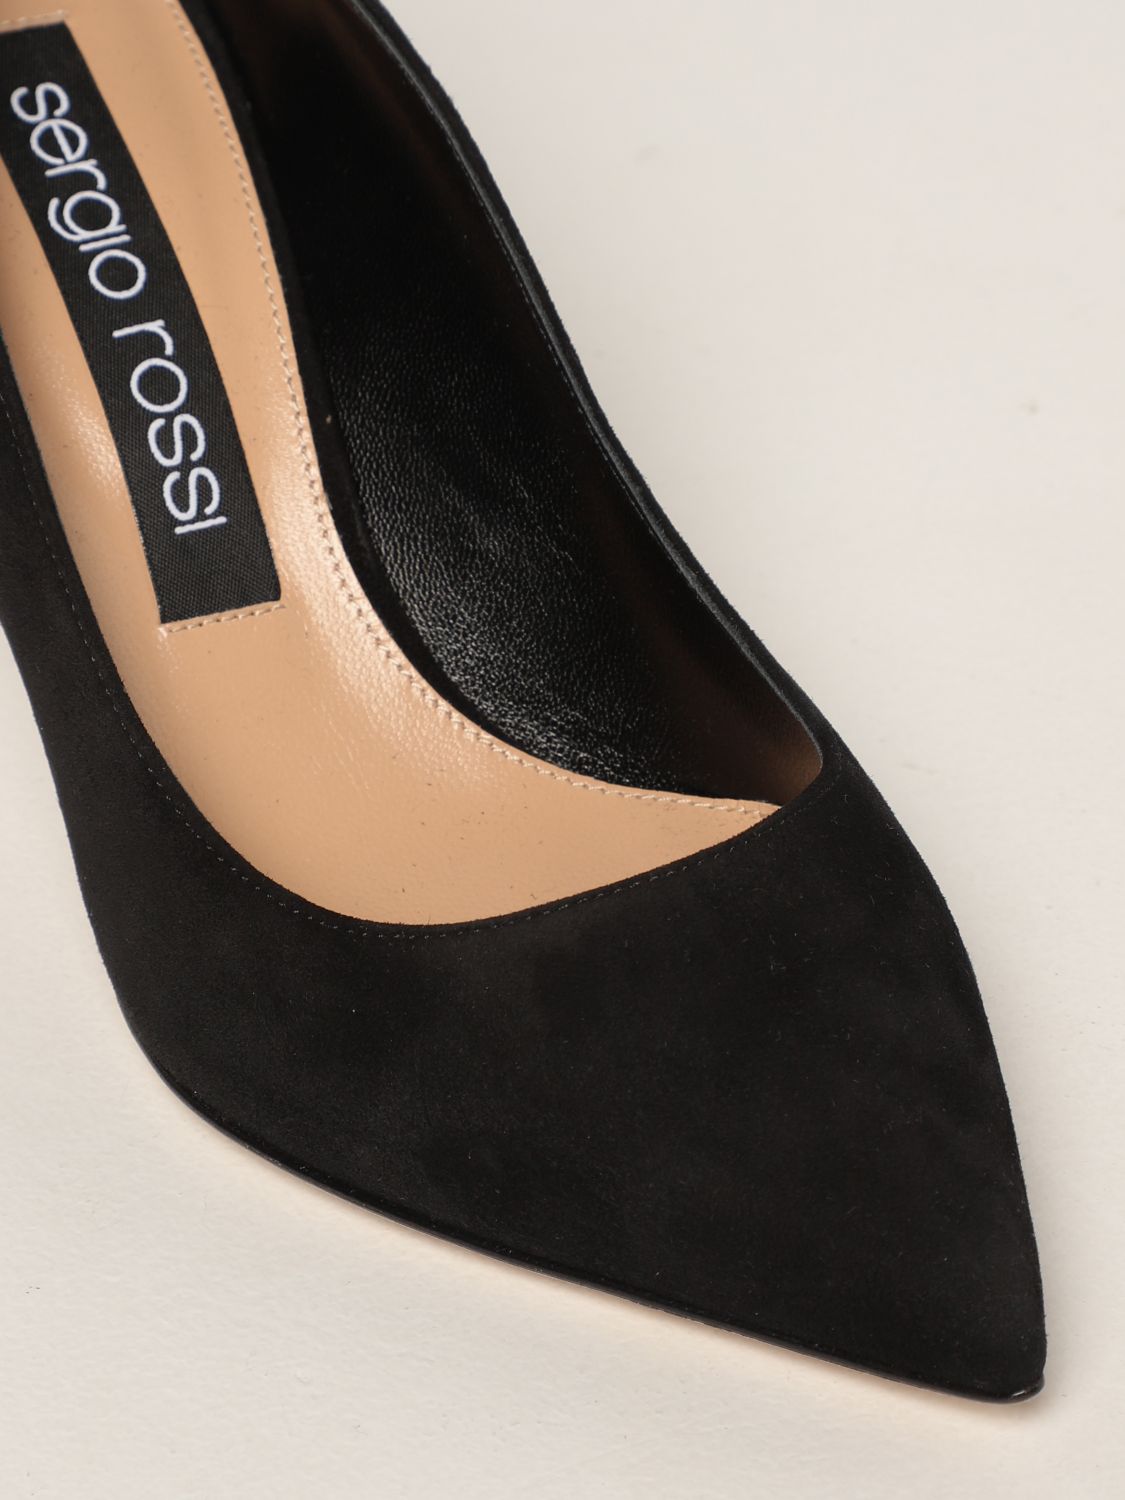 Court shoes Sergio Rossi: Sergio Rossi court shoes for women black 4